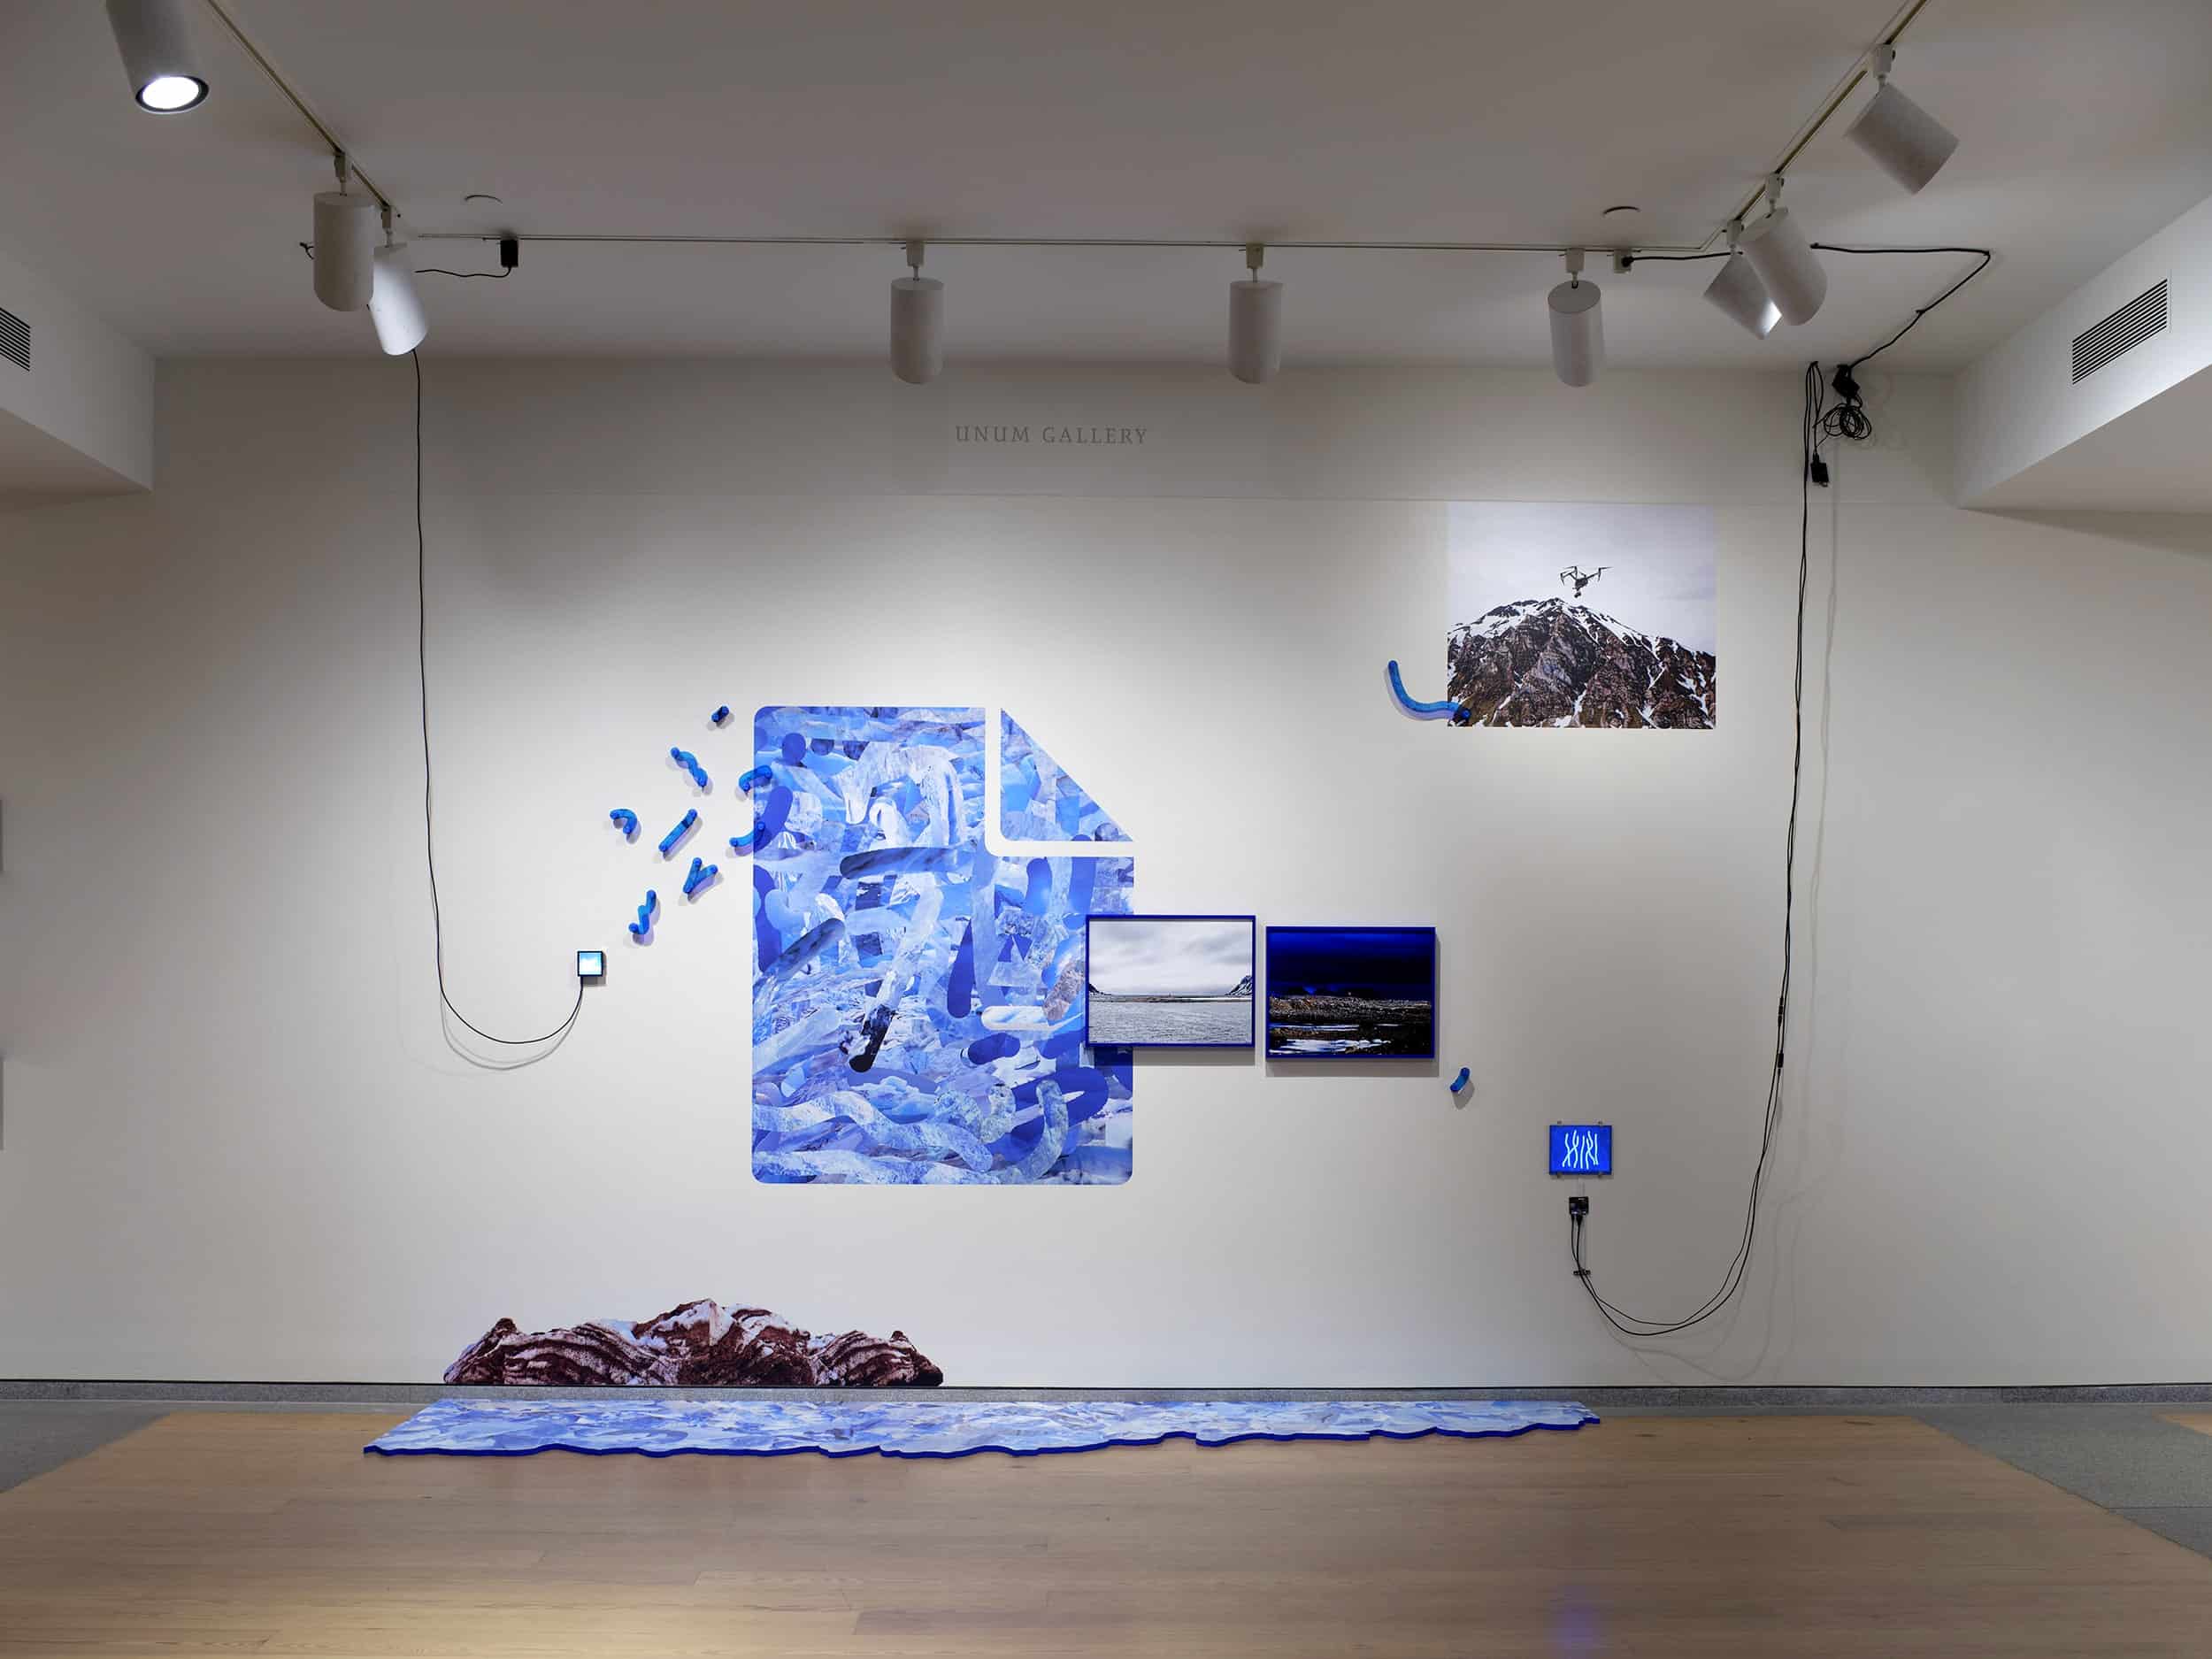 A multimedia installation showing combined images of ice in the shape of a folder, two small video pieces, two blue framed images of the Arctic landscape, an image of a drone flying in the sky, muddy ice, and a edge painted PVC floor piece that looks like a glacier.